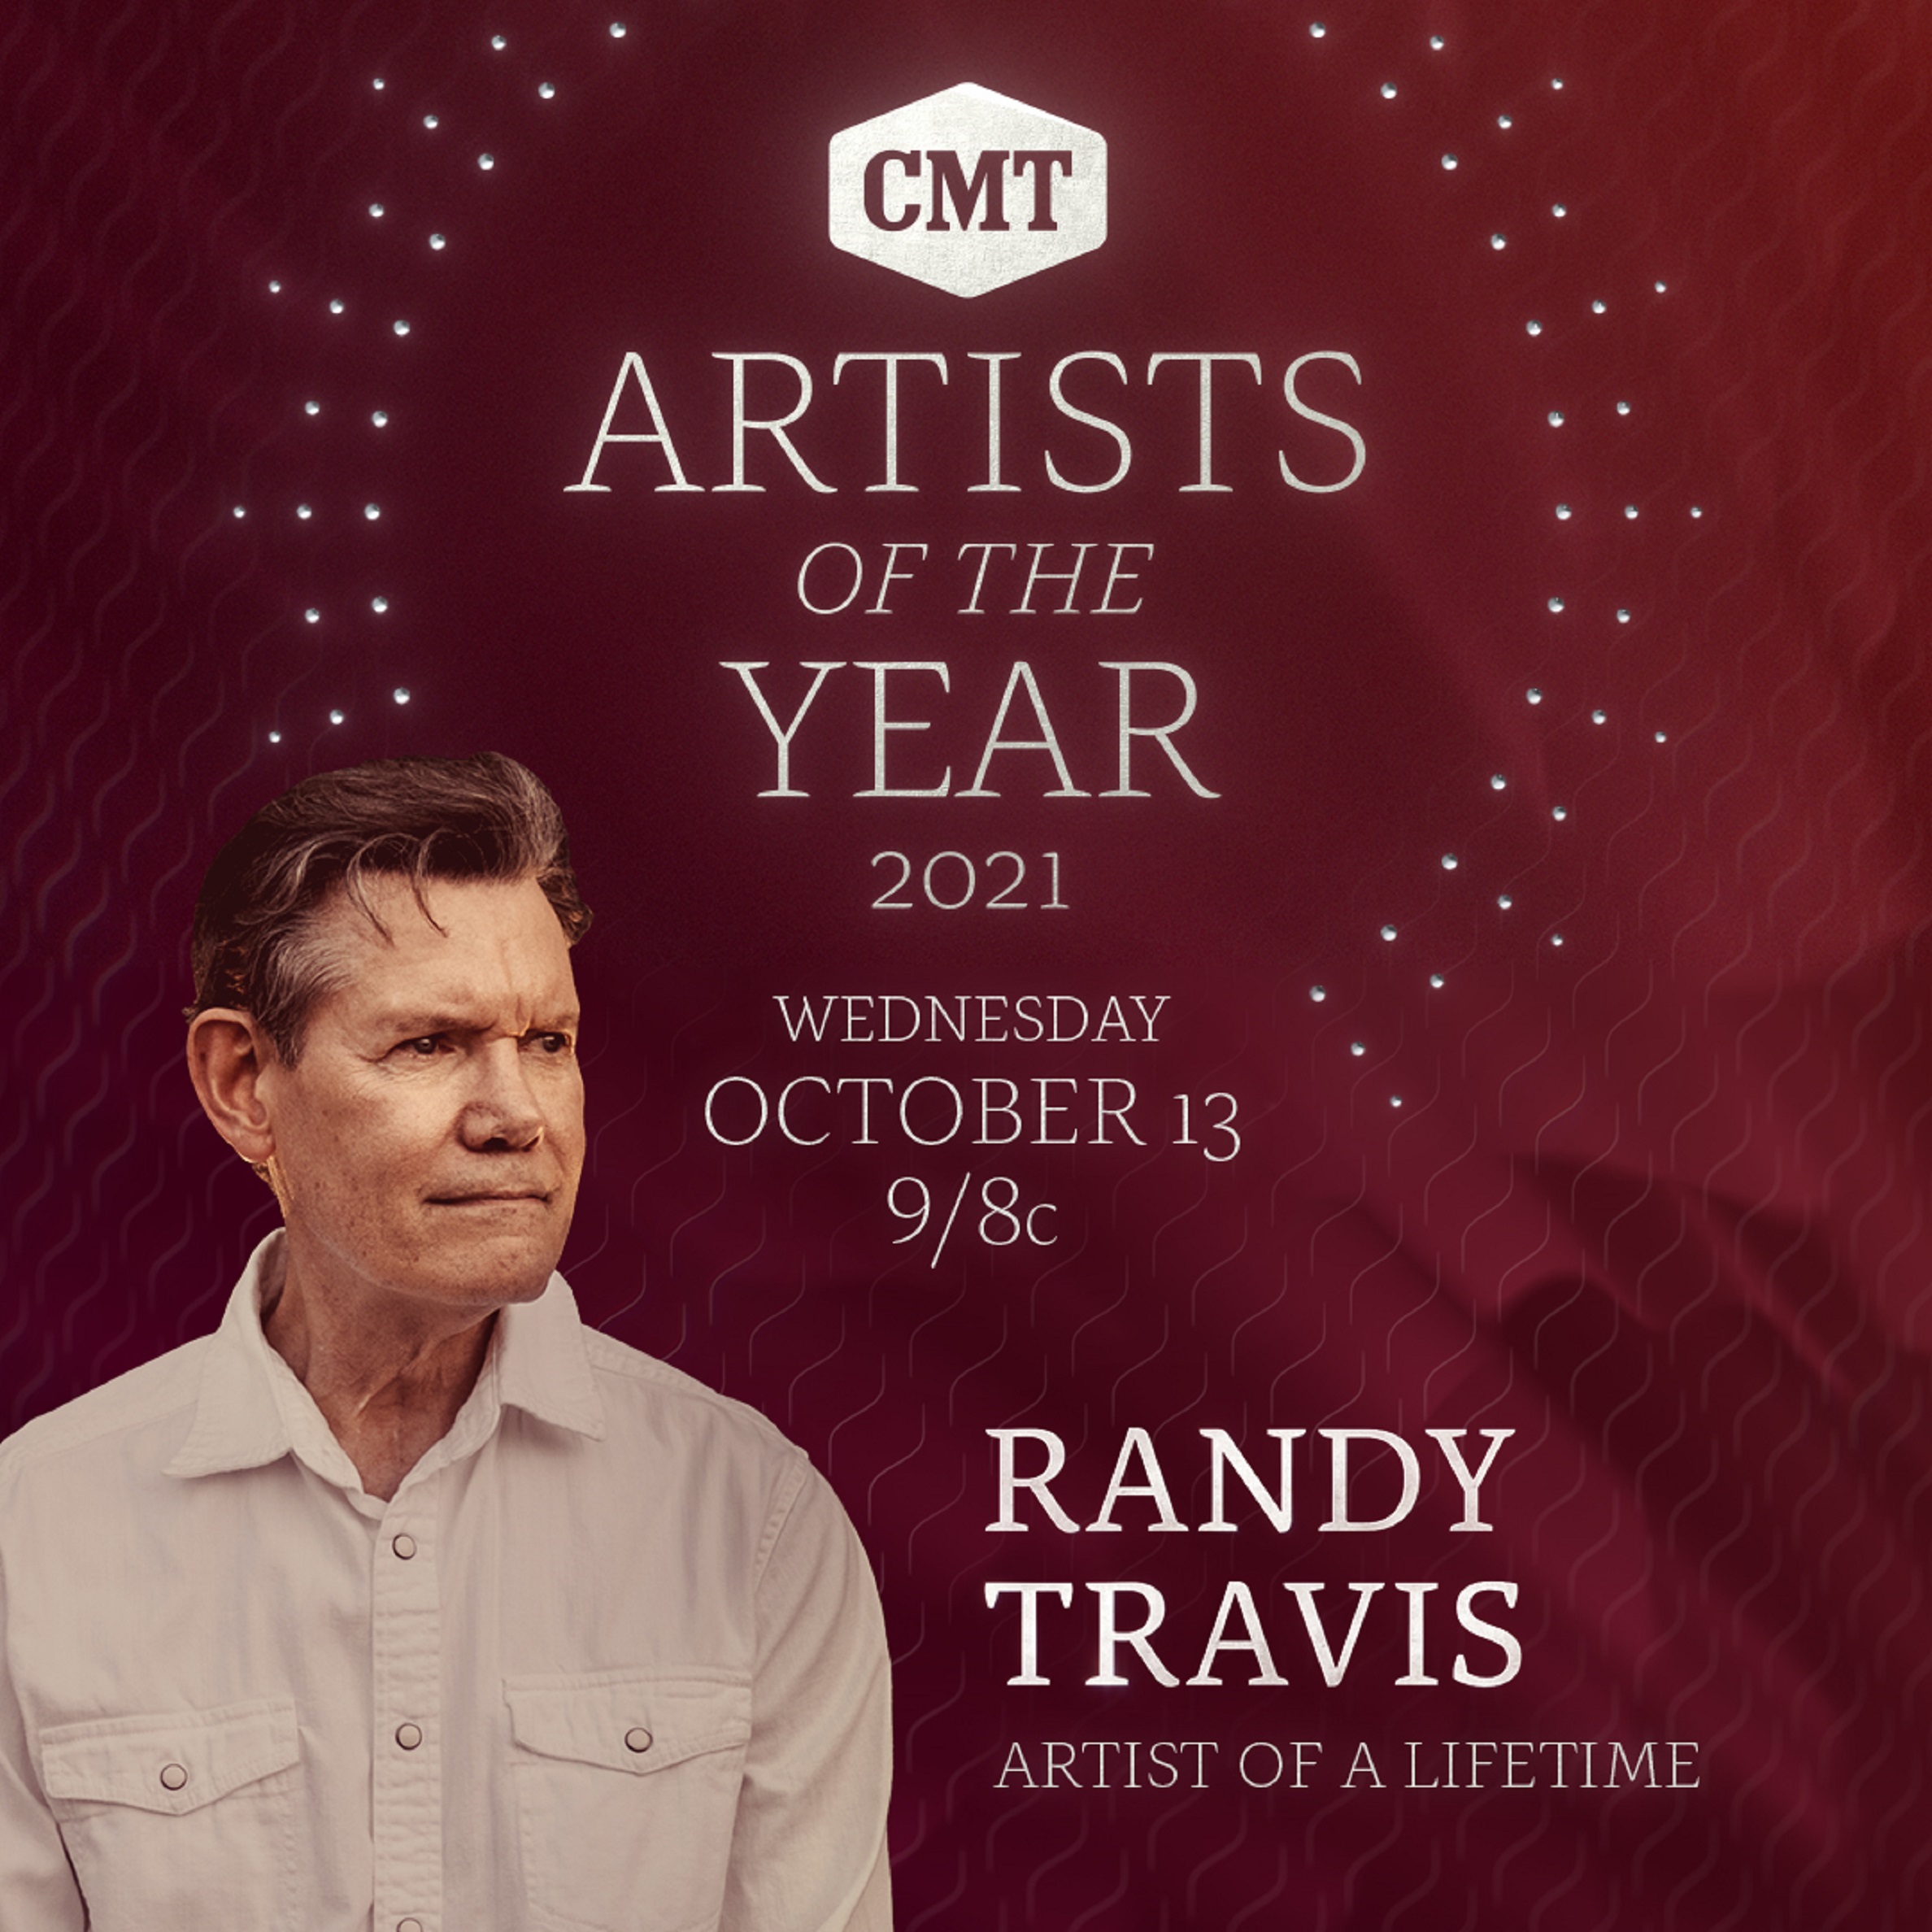 CMT To Honor The Legendary Randy Travis With “Artist of a Lifetime” Award